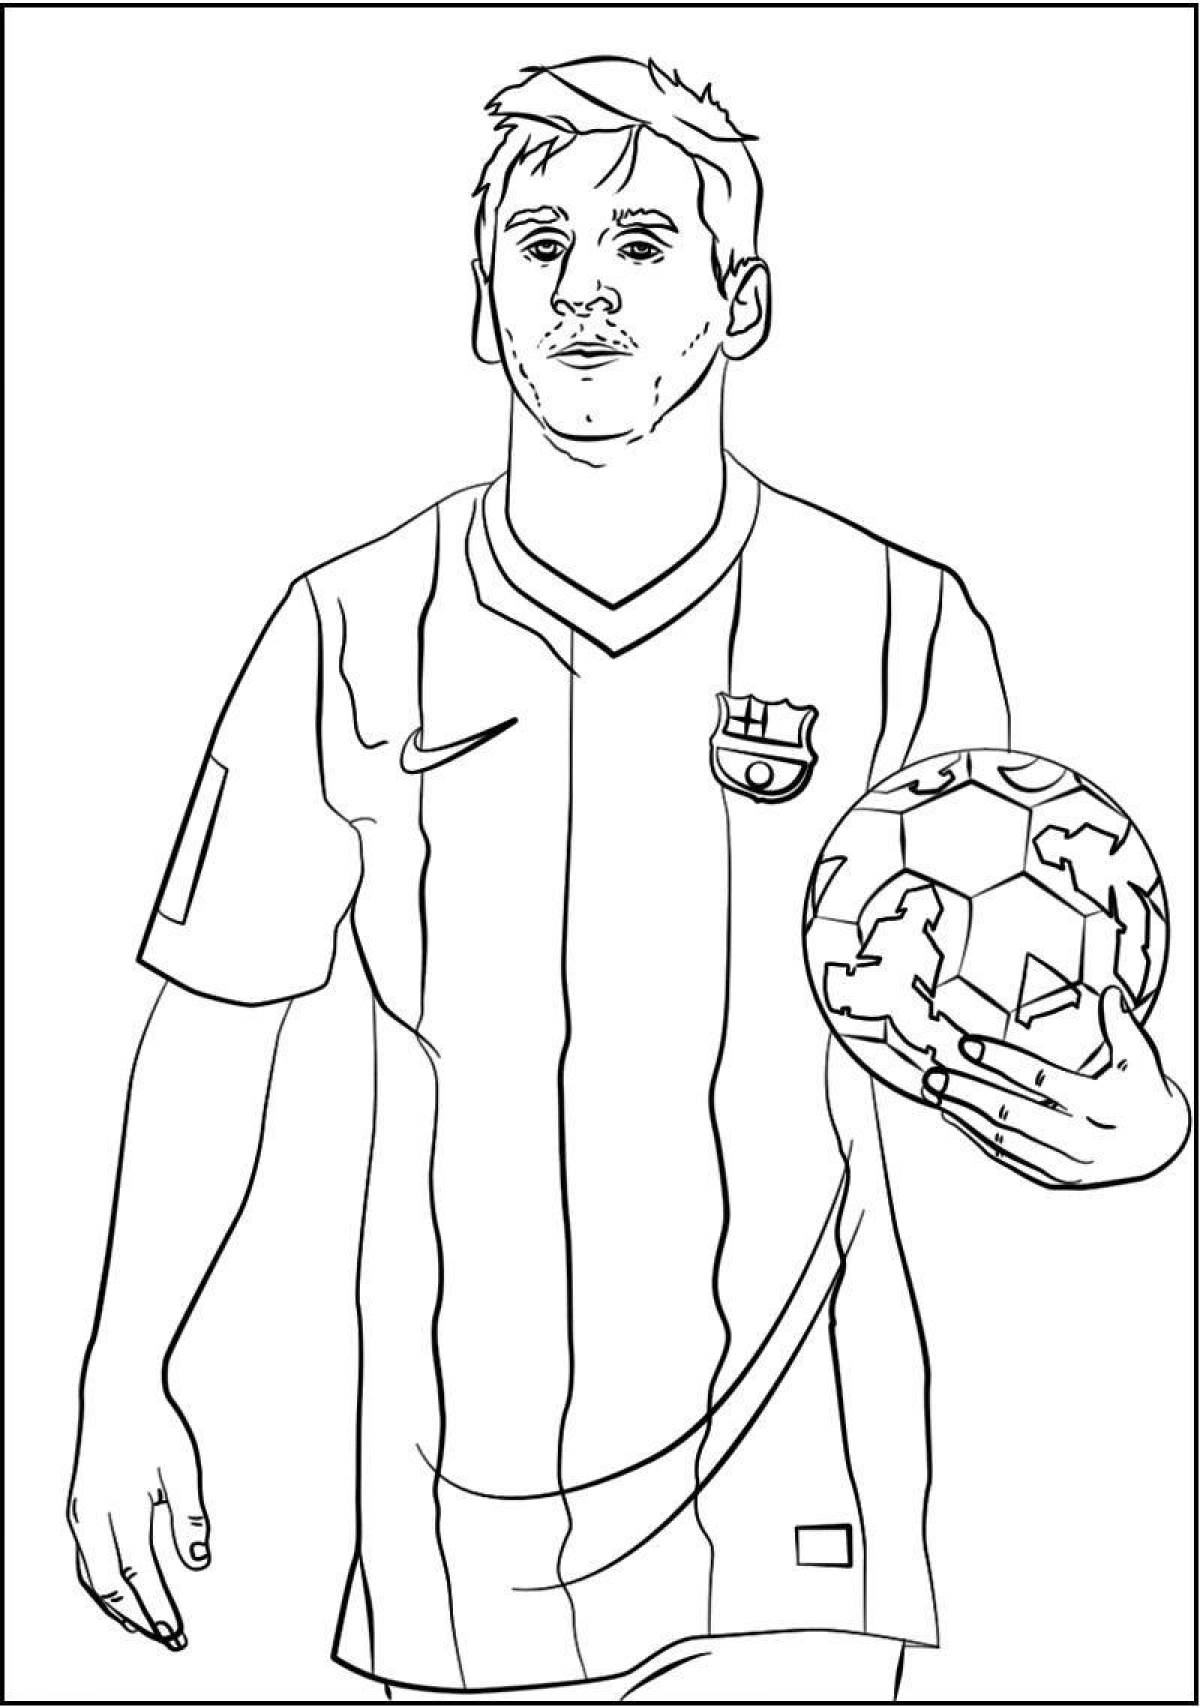 Great football coloring book